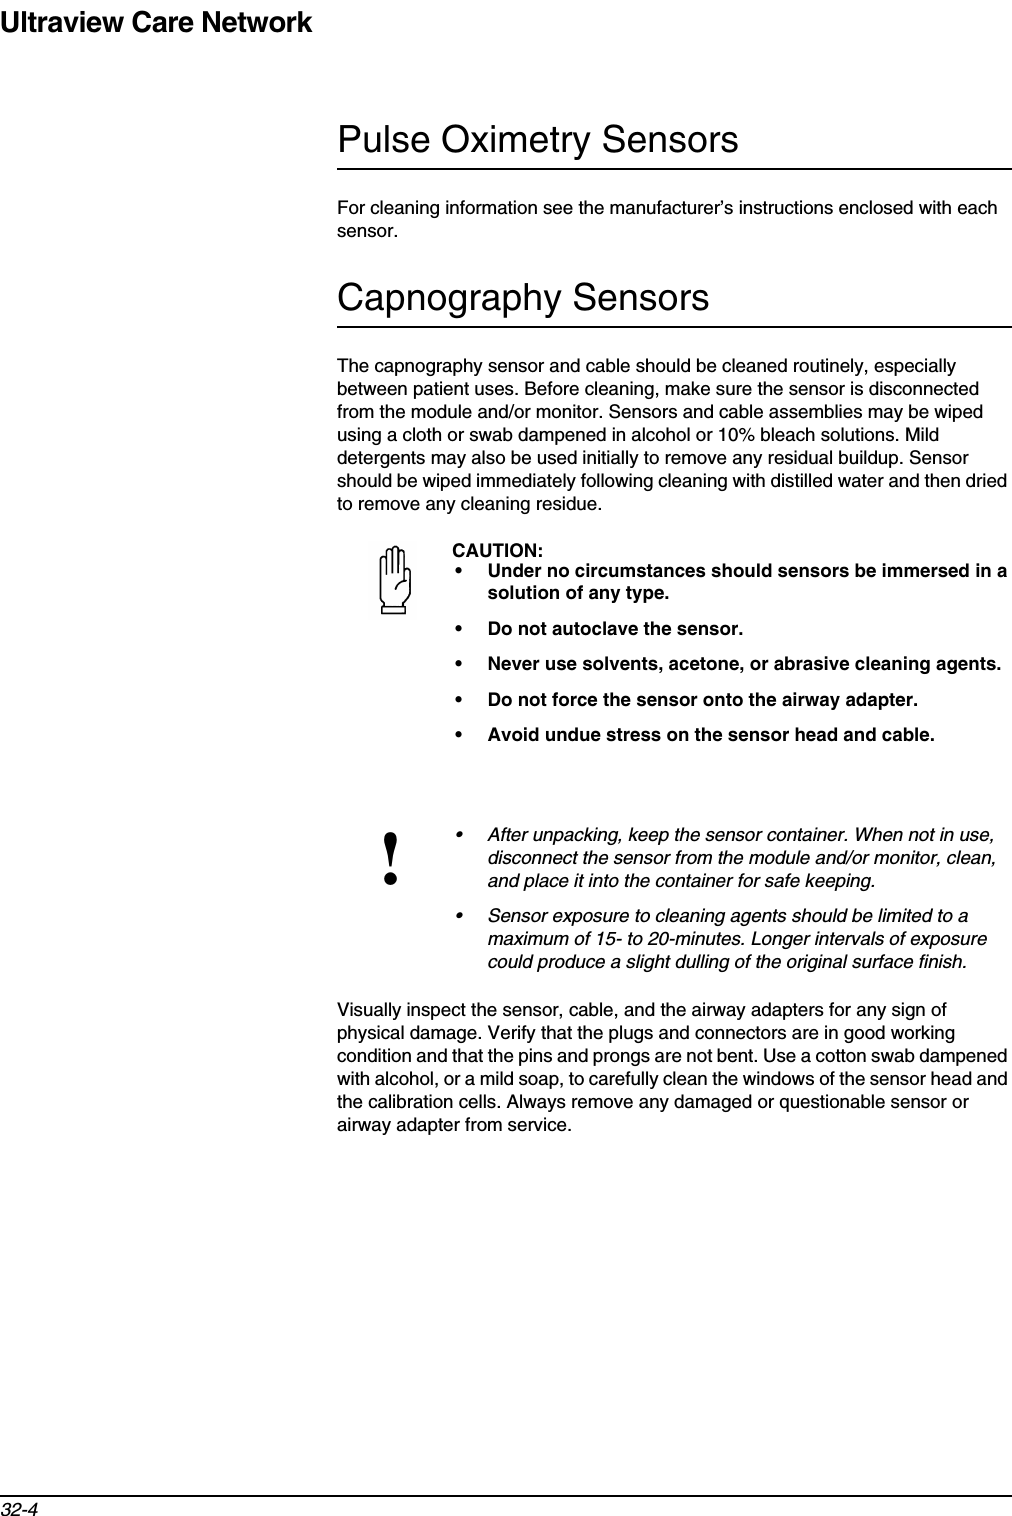 Ultraview Care Network32-4Pulse Oximetry SensorsFor cleaning information see the manufacturer’s instructions enclosed with each sensor.Capnography SensorsThe capnography sensor and cable should be cleaned routinely, especially between patient uses. Before cleaning, make sure the sensor is disconnected from the module and/or monitor. Sensors and cable assemblies may be wiped using a cloth or swab dampened in alcohol or 10% bleach solutions. Mild detergents may also be used initially to remove any residual buildup. Sensor should be wiped immediately following cleaning with distilled water and then dried to remove any cleaning residue. Visually inspect the sensor, cable, and the airway adapters for any sign of physical damage. Verify that the plugs and connectors are in good working condition and that the pins and prongs are not bent. Use a cotton swab dampened with alcohol, or a mild soap, to carefully clean the windows of the sensor head and the calibration cells. Always remove any damaged or questionable sensor or airway adapter from service.CAUTION:• Under no circumstances should sensors be immersed in a solution of any type.• Do not autoclave the sensor.• Never use solvents, acetone, or abrasive cleaning agents.• Do not force the sensor onto the airway adapter.• Avoid undue stress on the sensor head and cable.!• After unpacking, keep the sensor container. When not in use, disconnect the sensor from the module and/or monitor, clean, and place it into the container for safe keeping.• Sensor exposure to cleaning agents should be limited to a maximum of 15- to 20-minutes. Longer intervals of exposure could produce a slight dulling of the original surface finish.